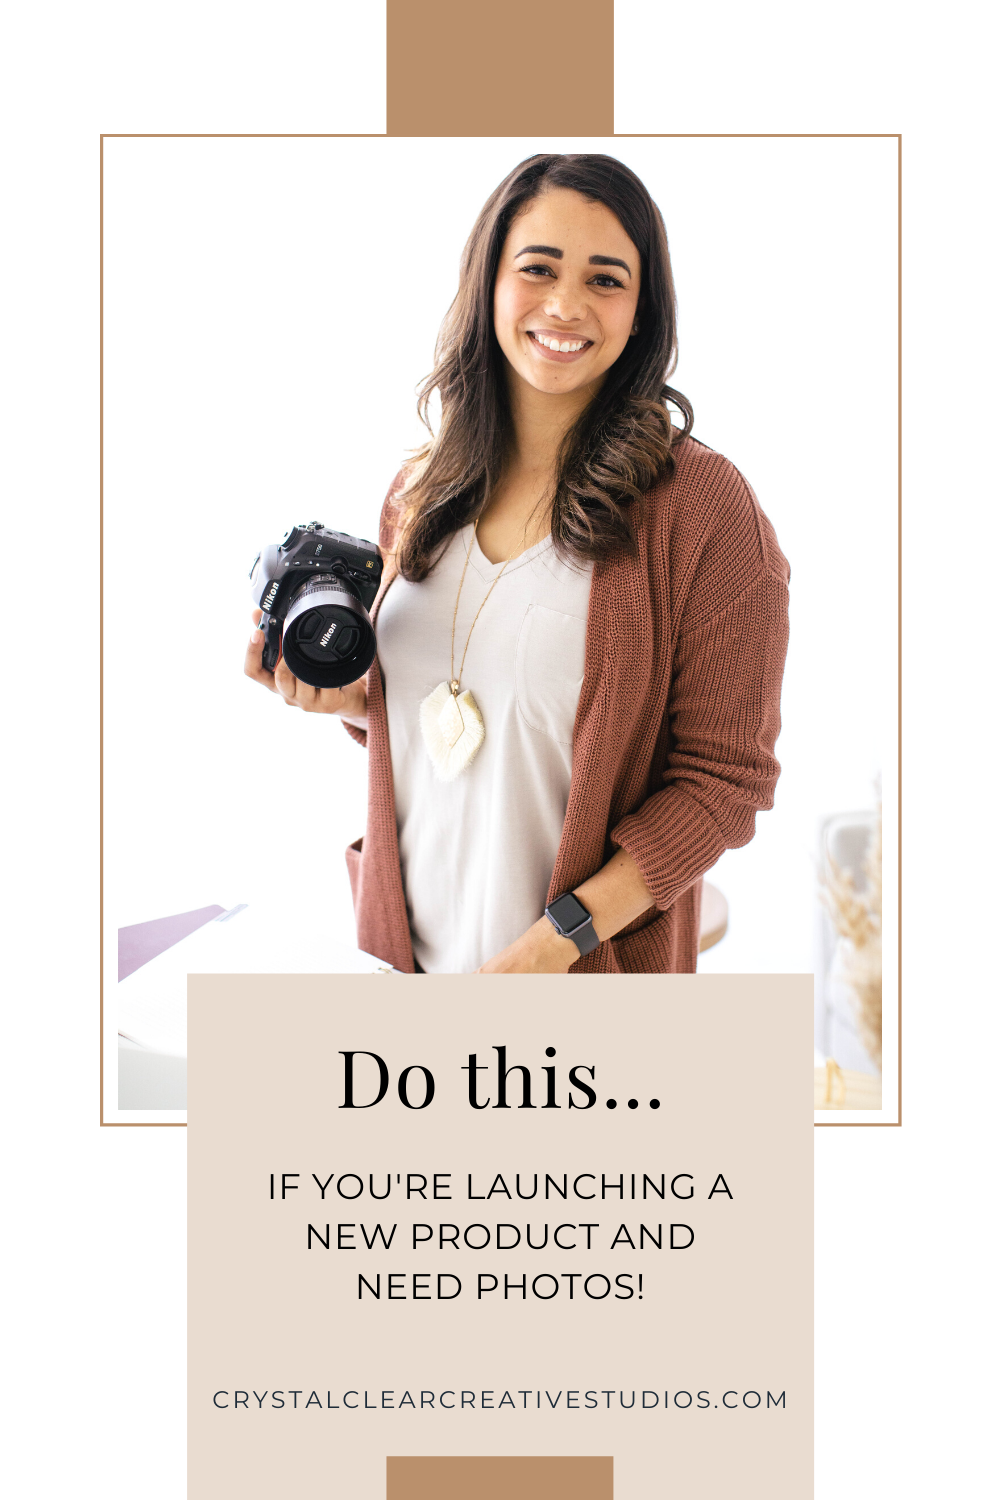 Launching a New Product? Here's 3 Types of Photos You Need!